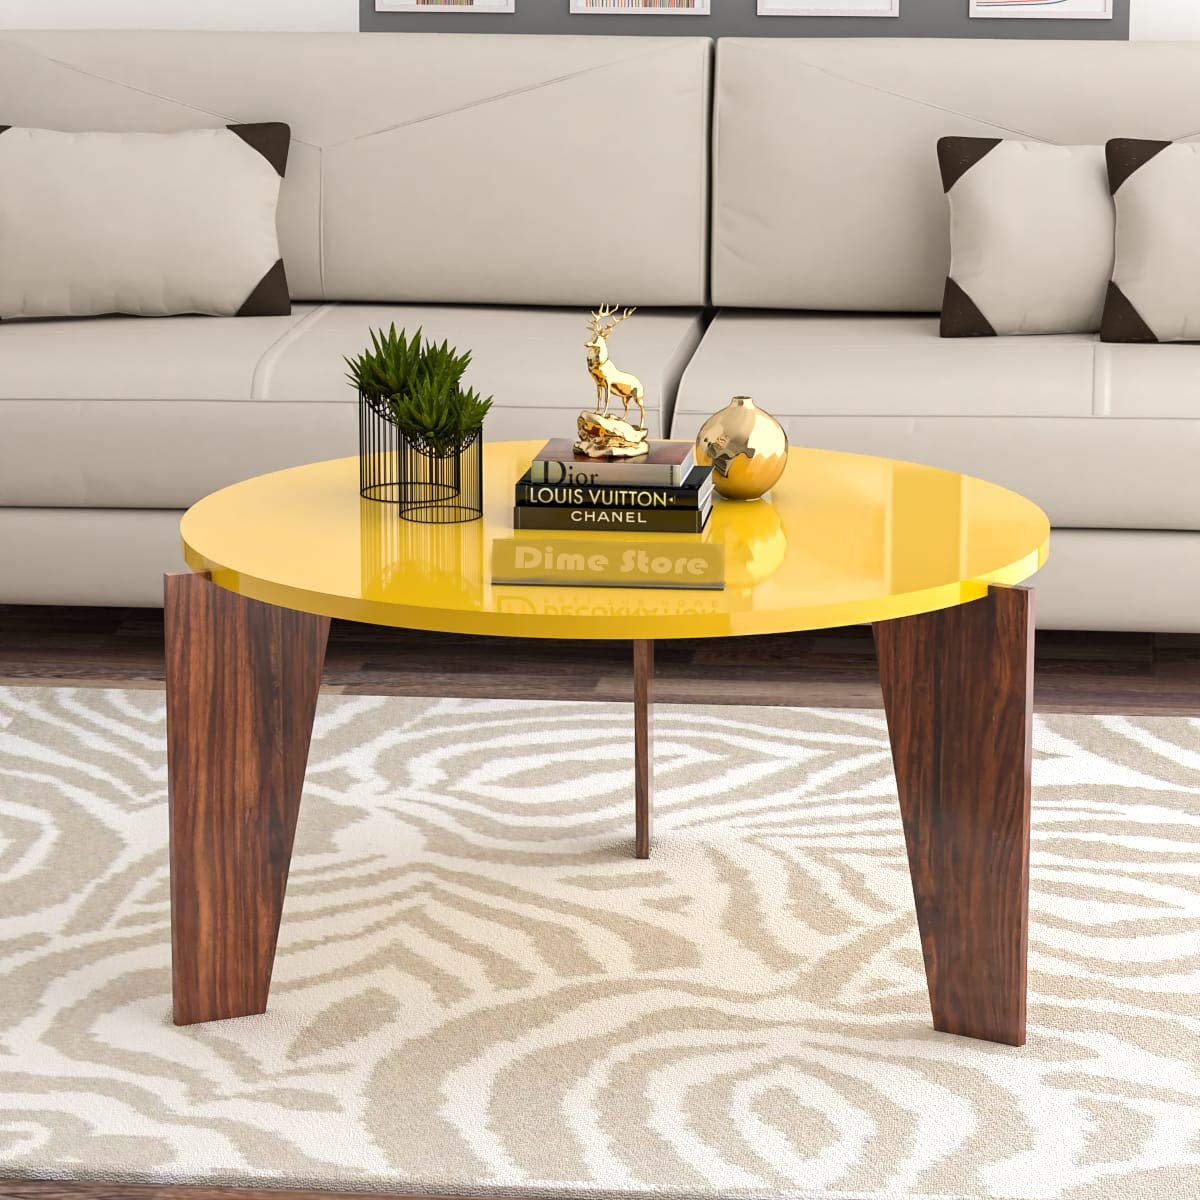 Wooden Iron Round Table Coffee Table for Living Room Center Table Home Office Dime Store